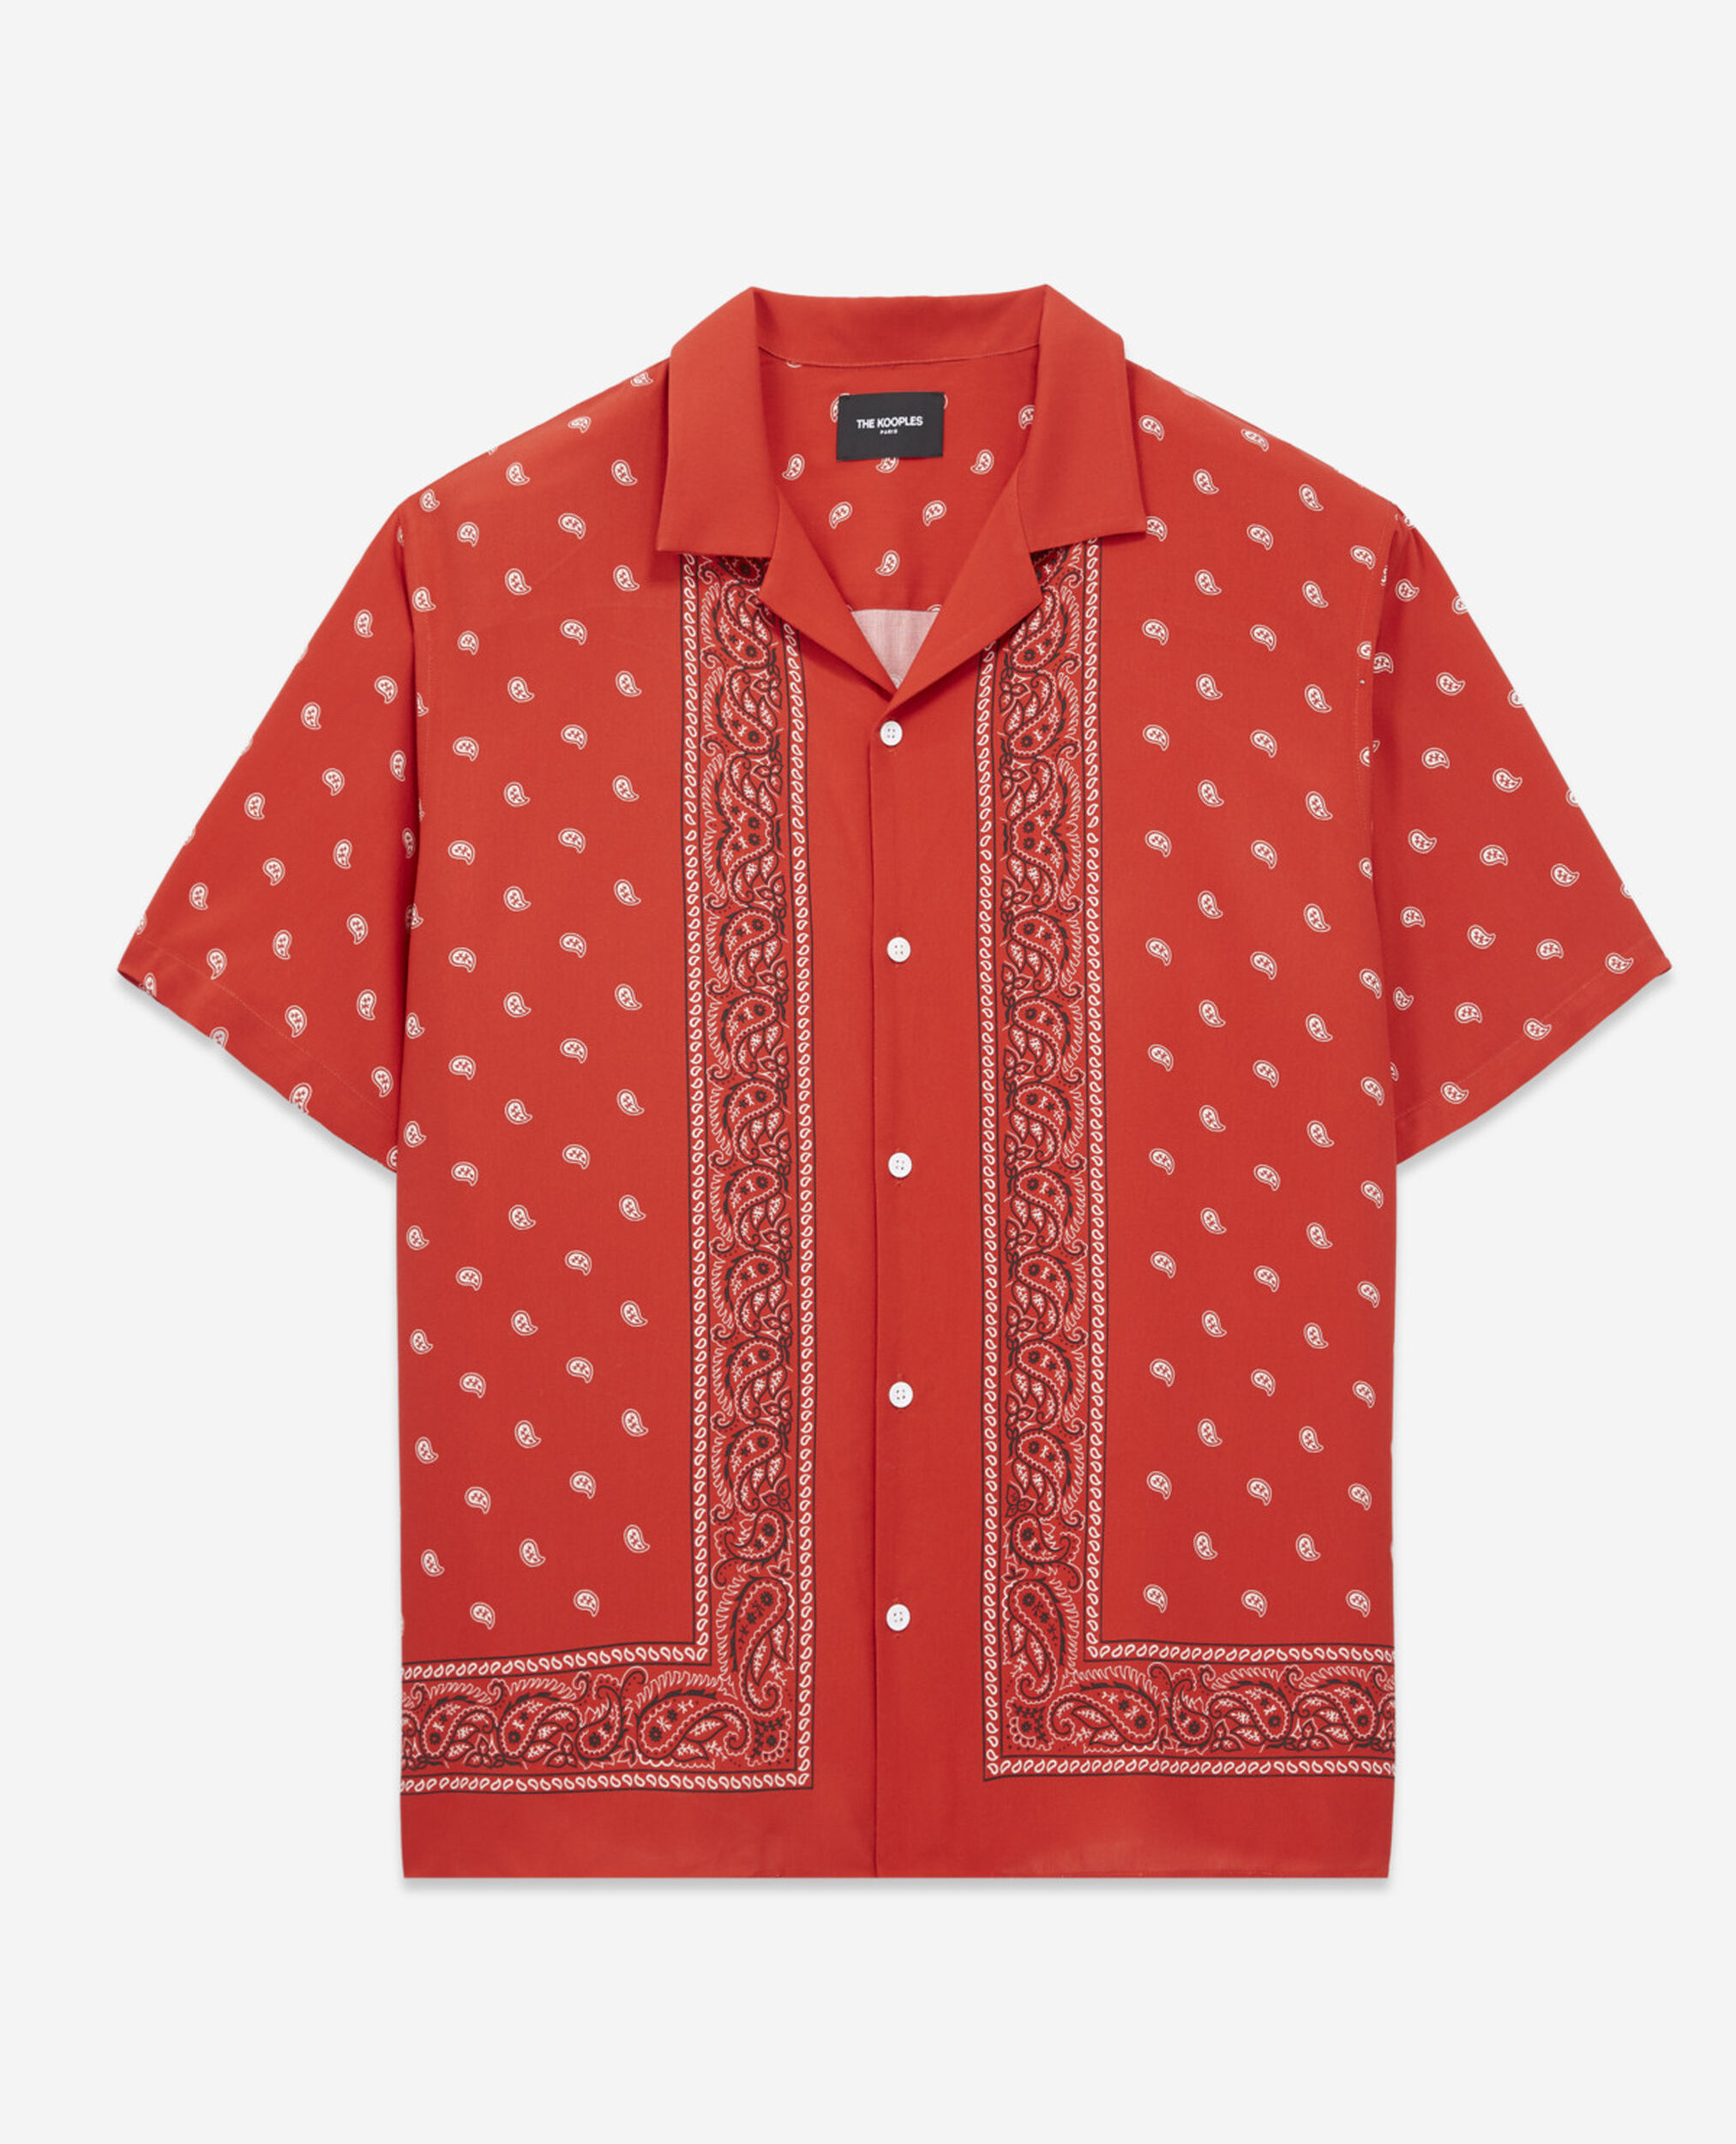 Chemise col requin, RED-BLACK-WHITE, hi-res image number null